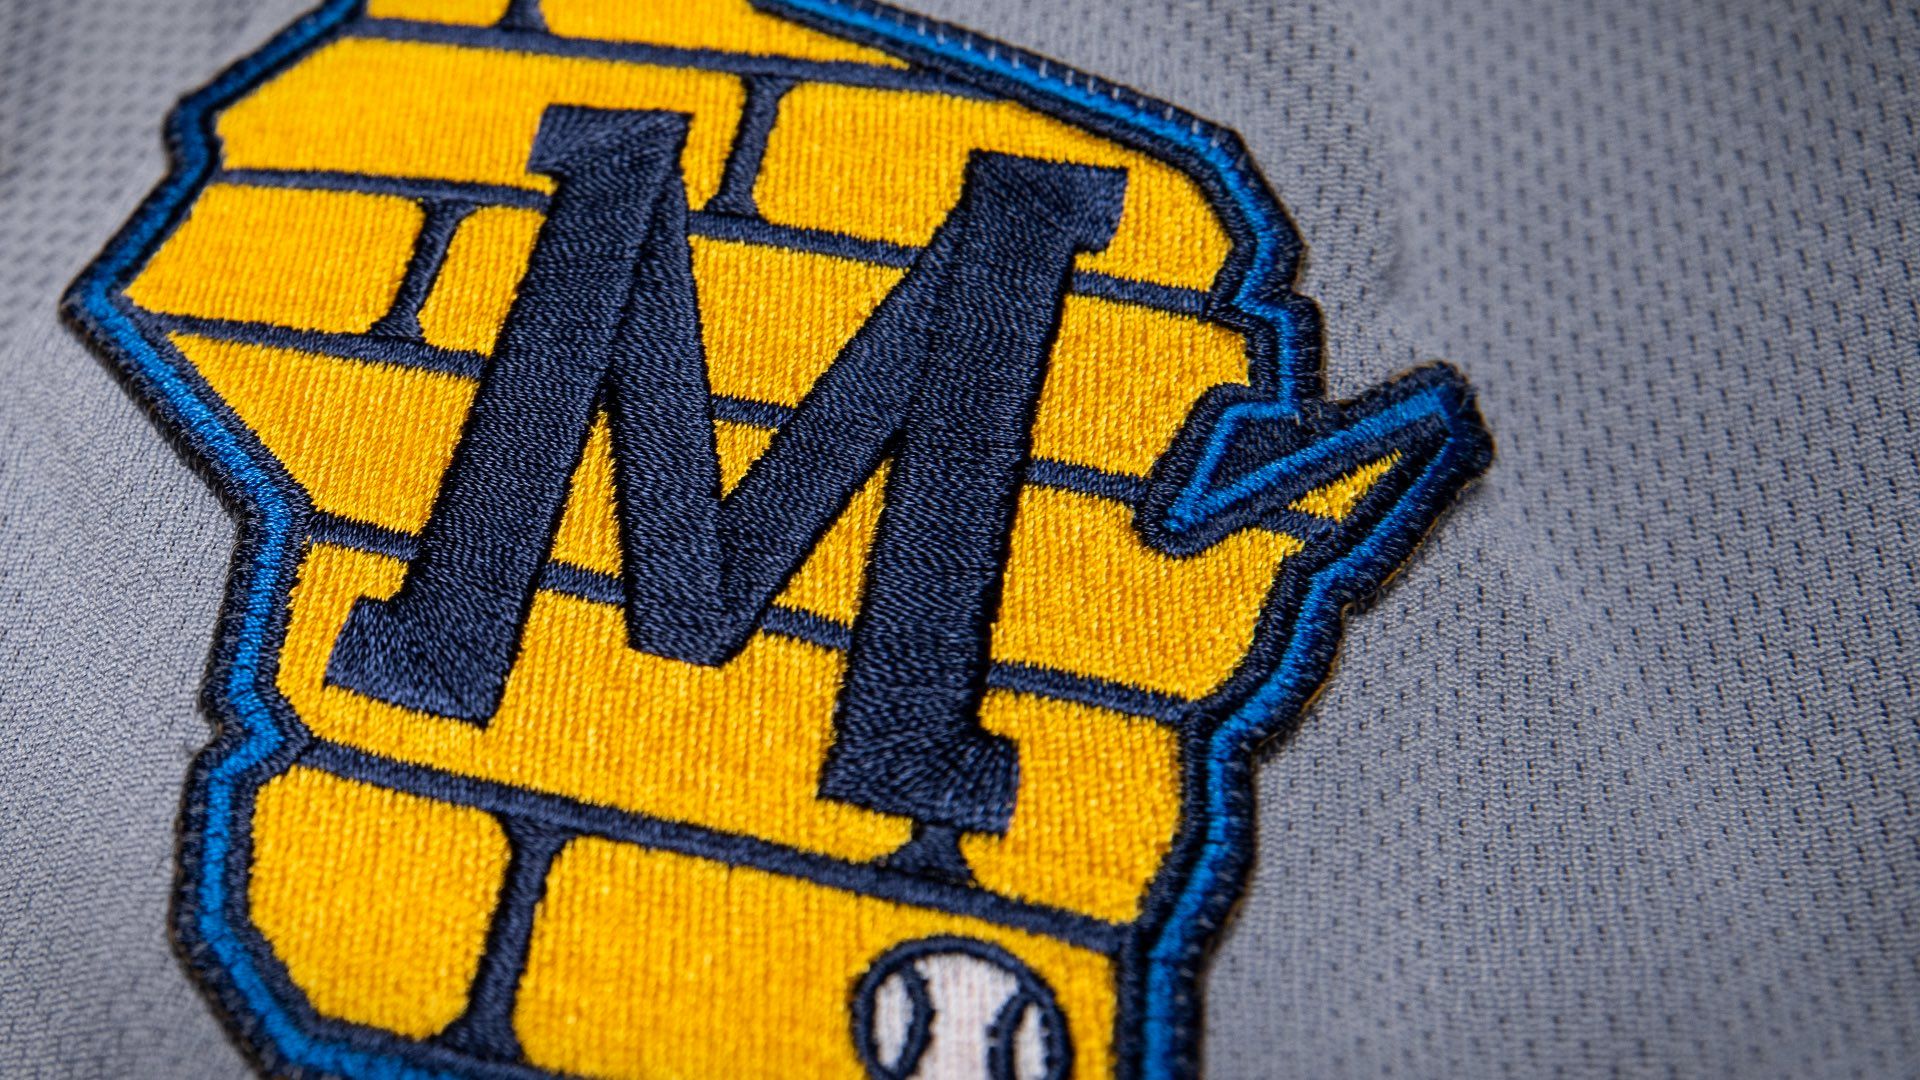 Brand New: New Logos and Uniforms for Milwaukee Brewers